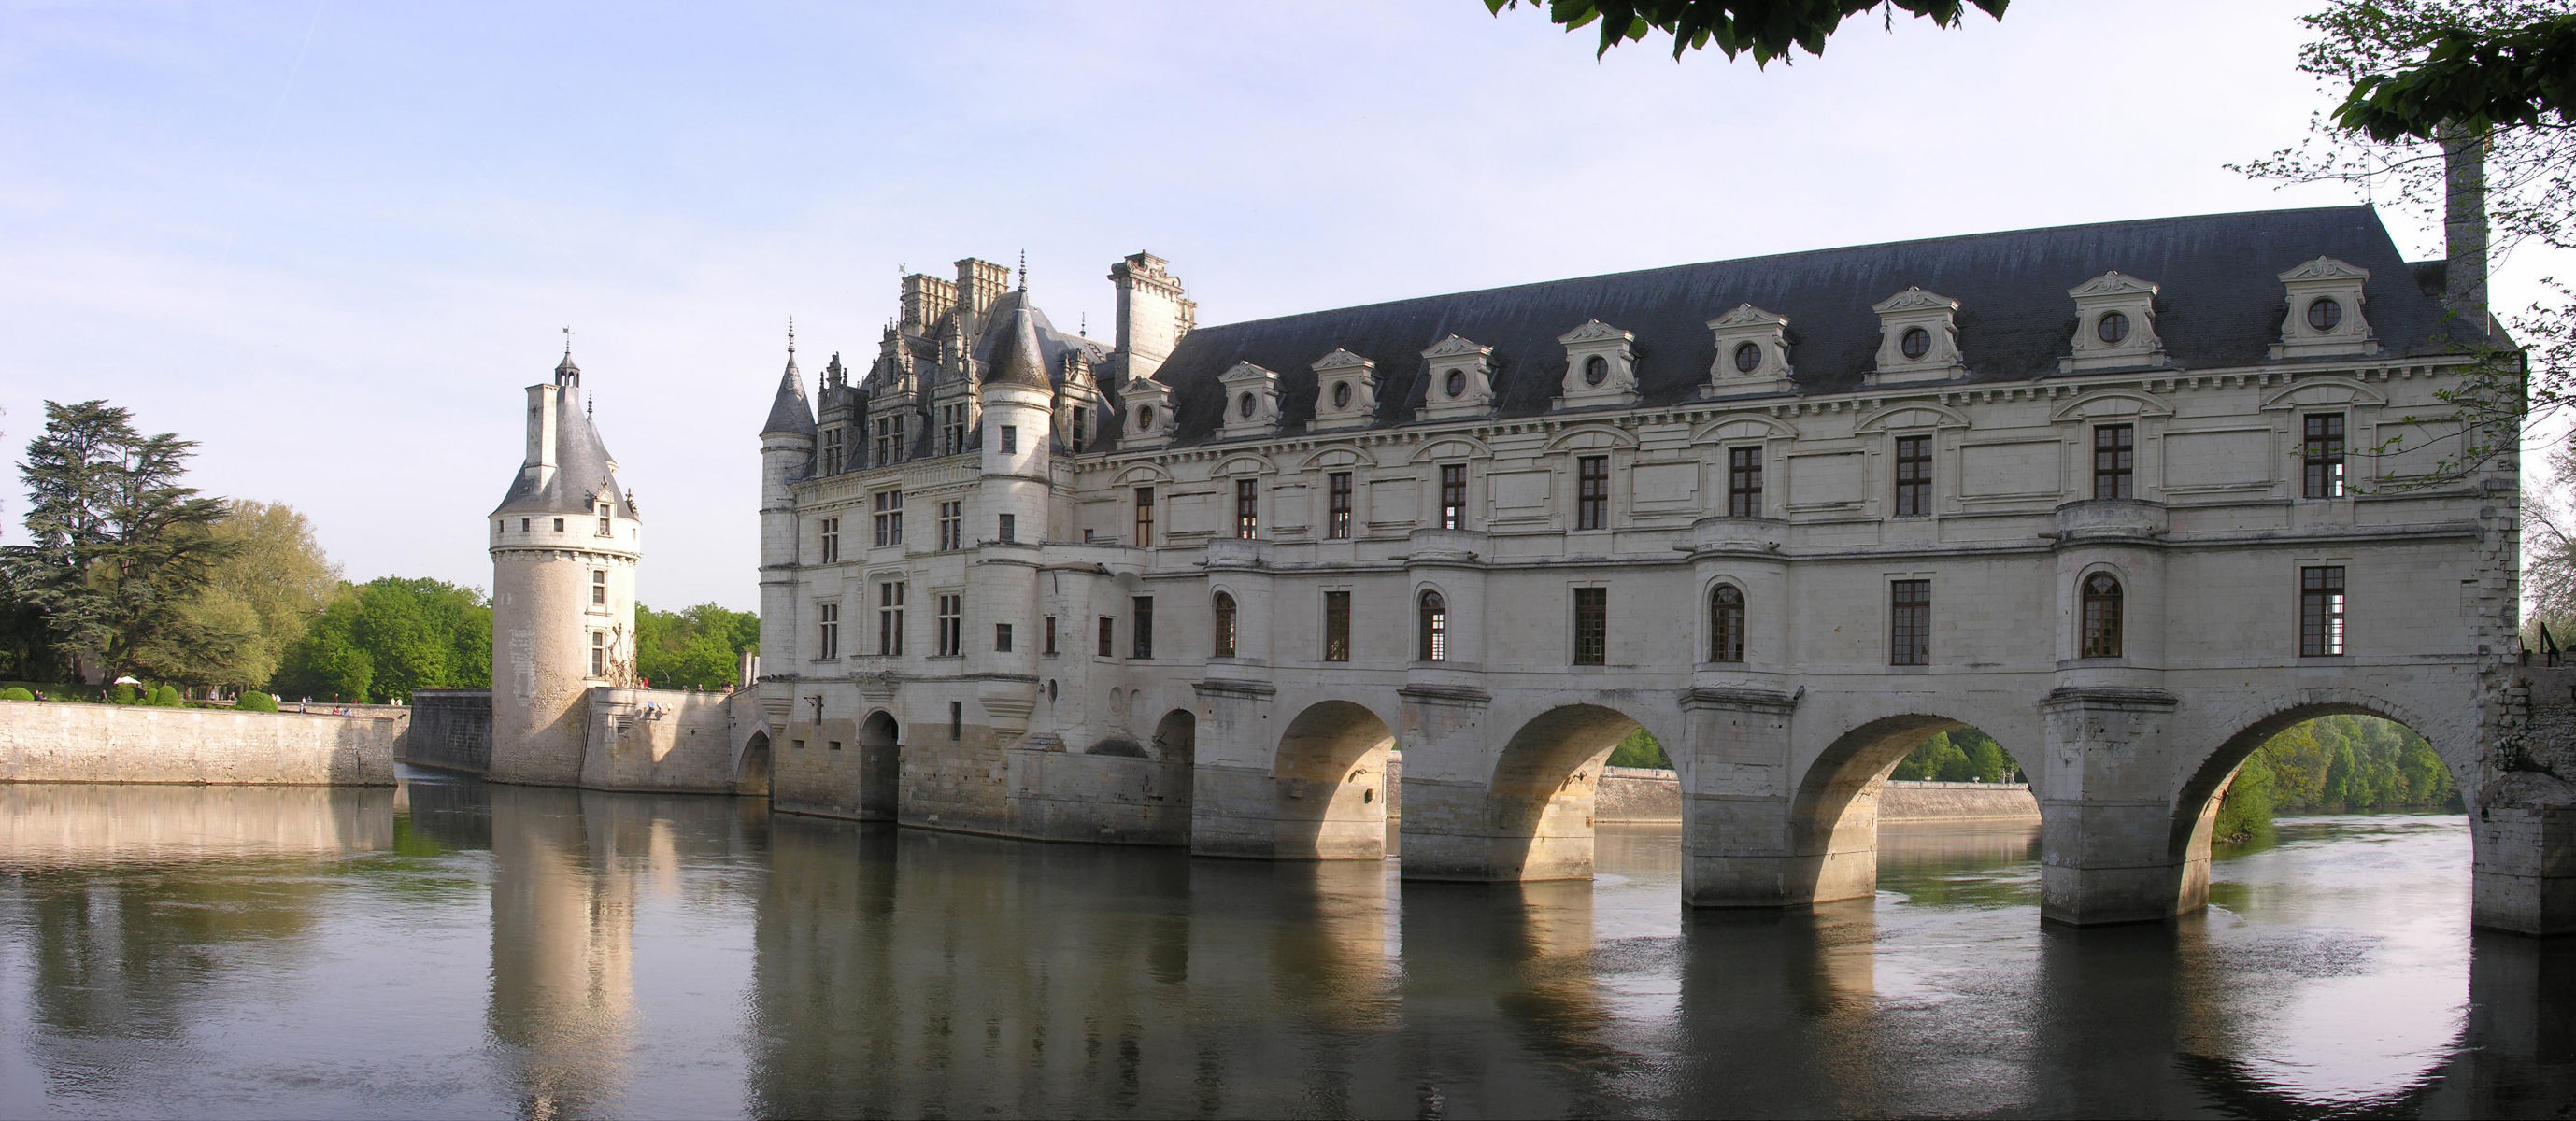 Castle of Chenonceau - France3.jpg